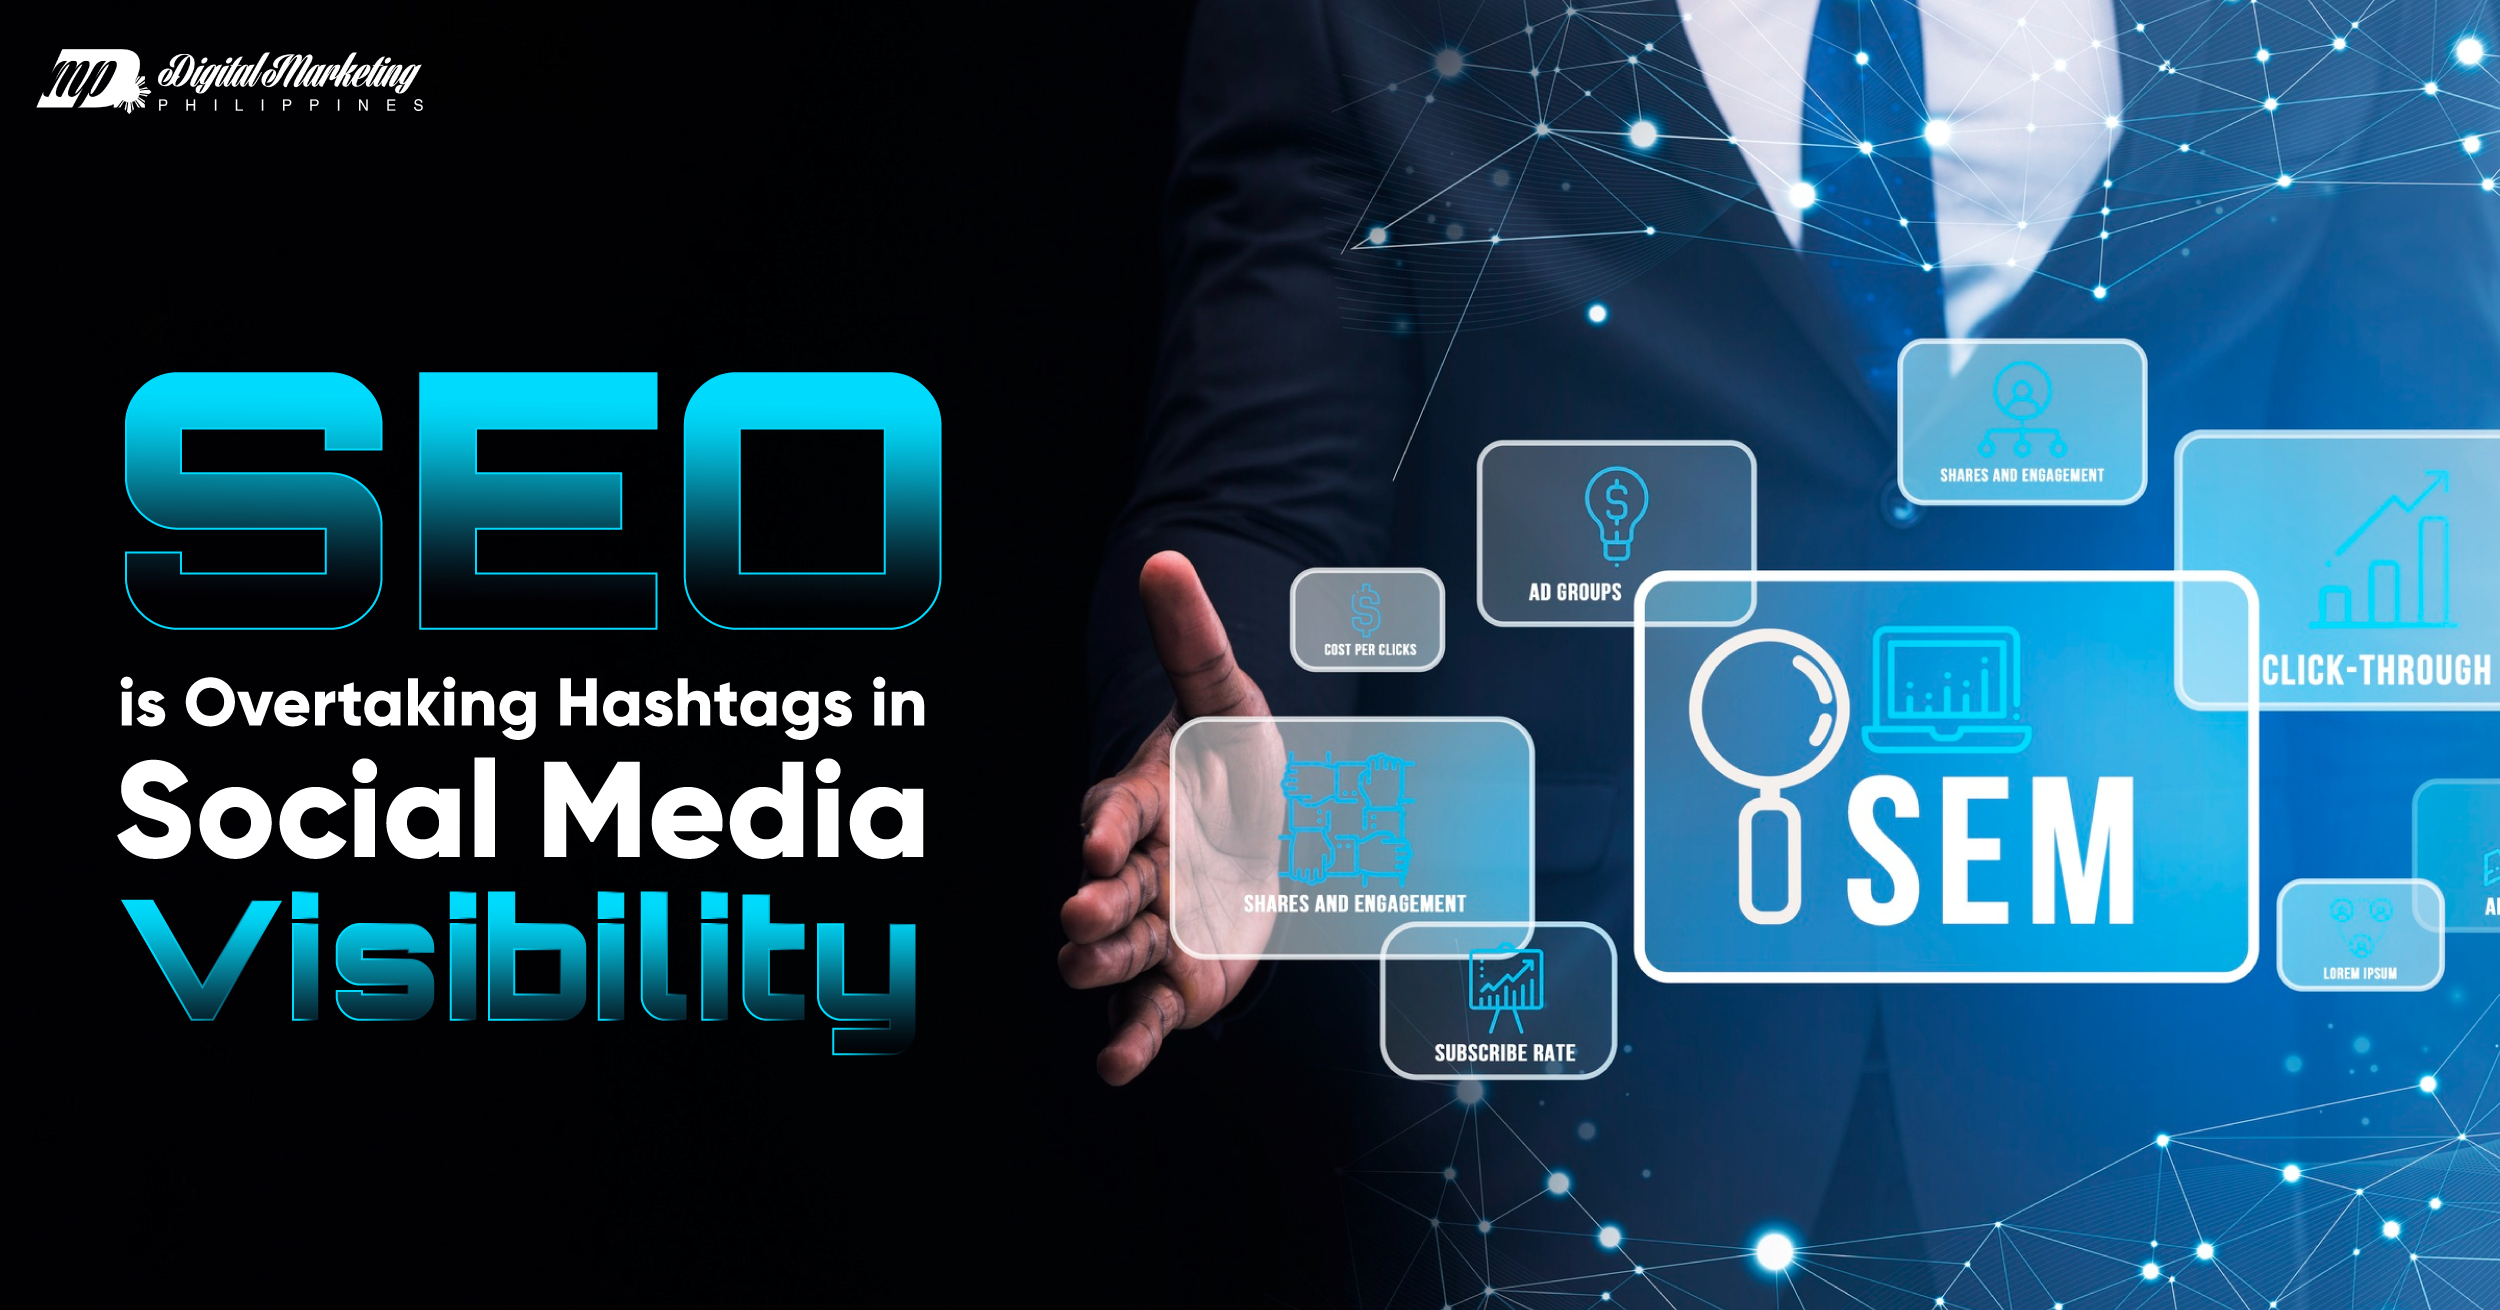 SEO is Overtaking Hashtags in Social Media Visibility featured image